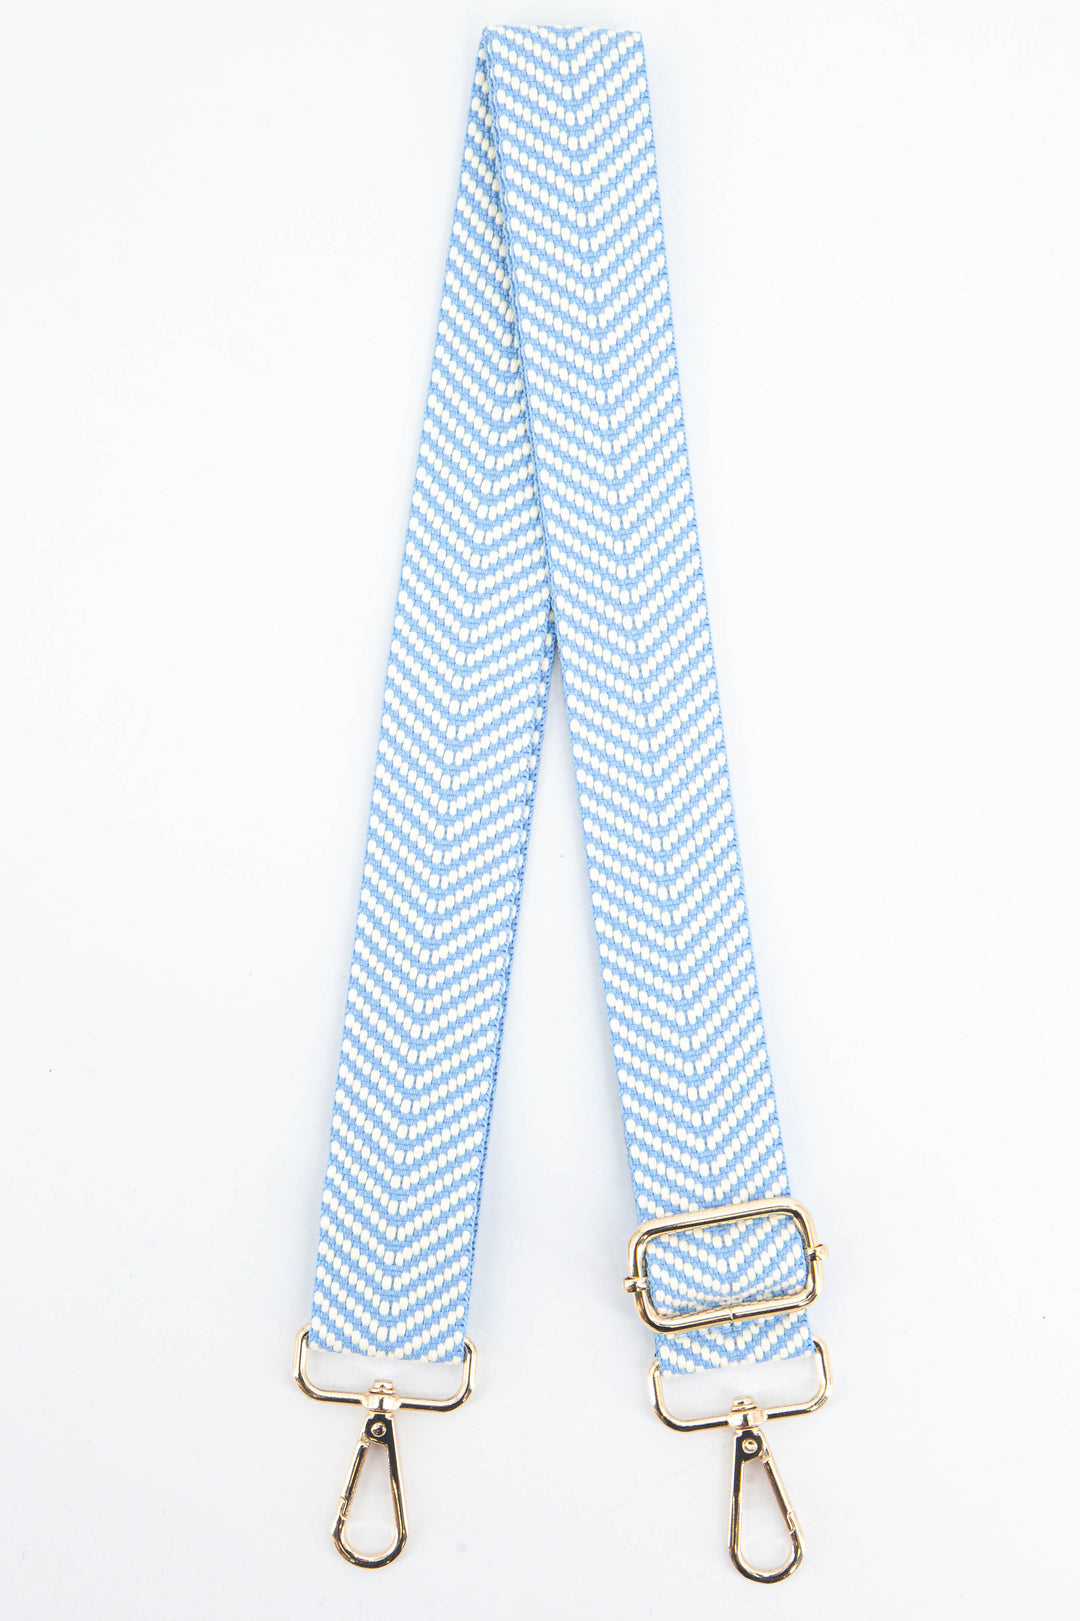 light blue and white chevron pattern woven bag strap with gold clip on snap hook attachments